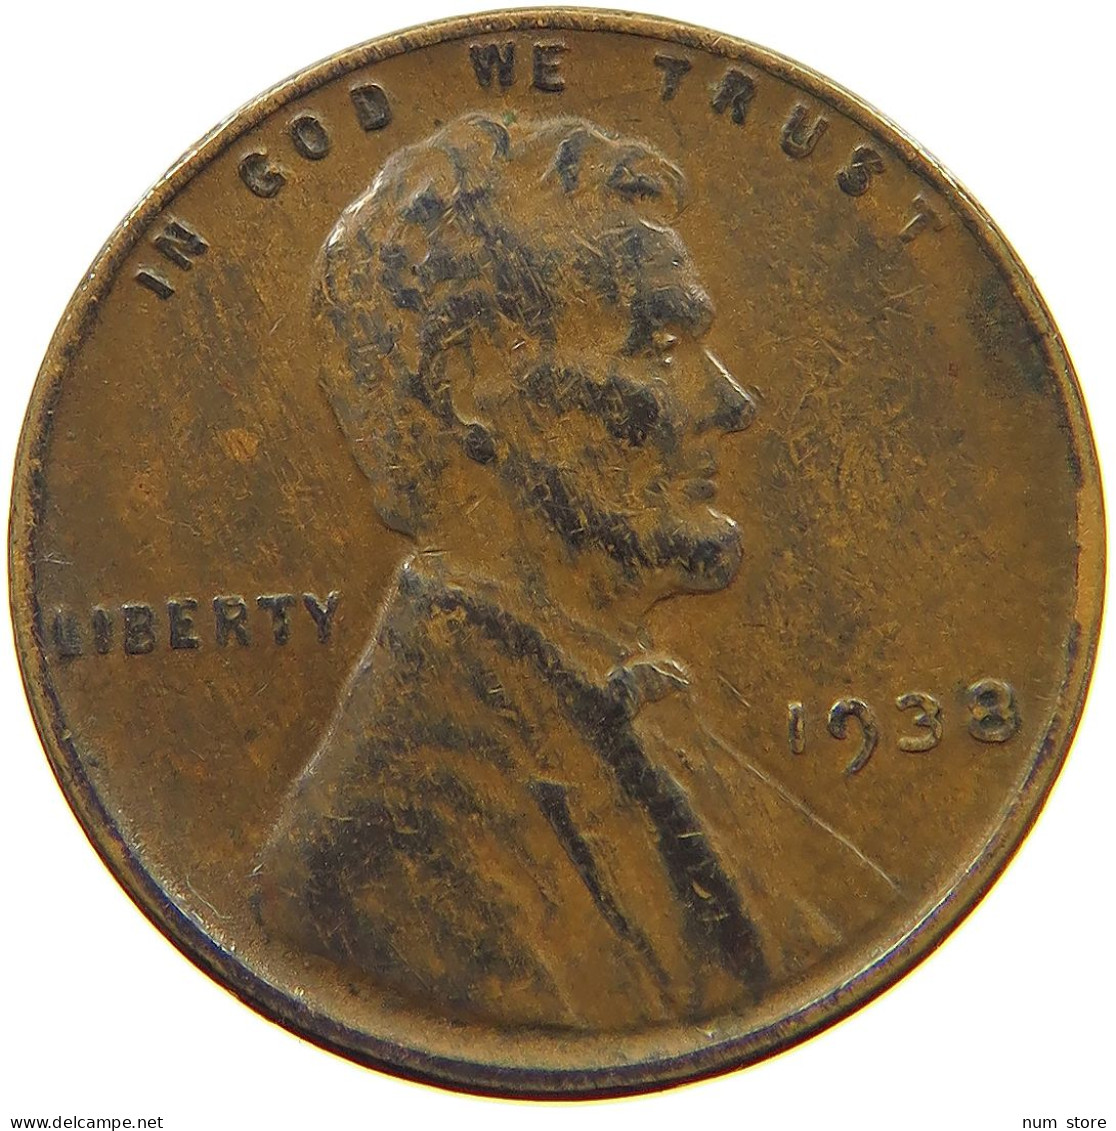 UNITED STATES OF AMERICA CENT 1938 LINCOLN WHEAT #s063 0513 - 1909-1958: Lincoln, Wheat Ears Reverse